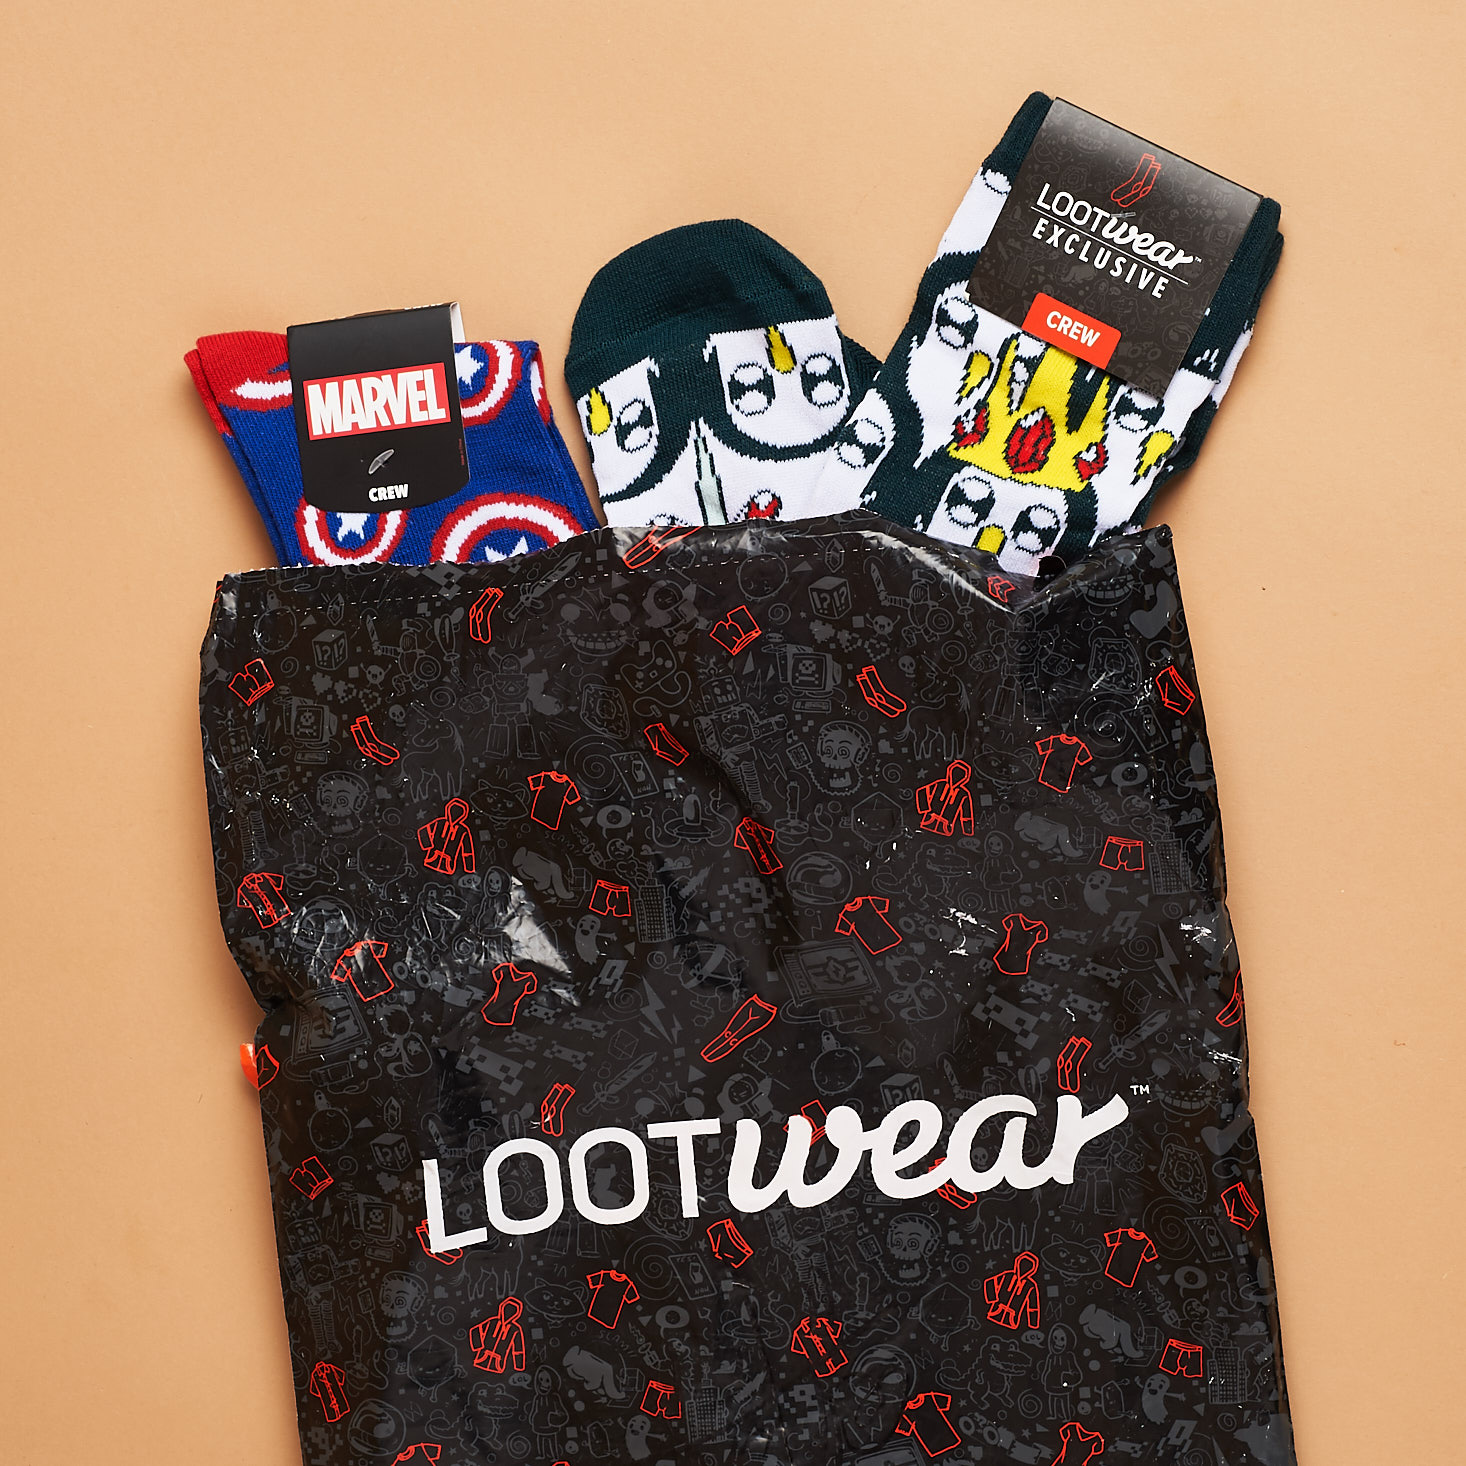 Loot Socks Subscription by Loot Crate Review + Coupon – April 2018